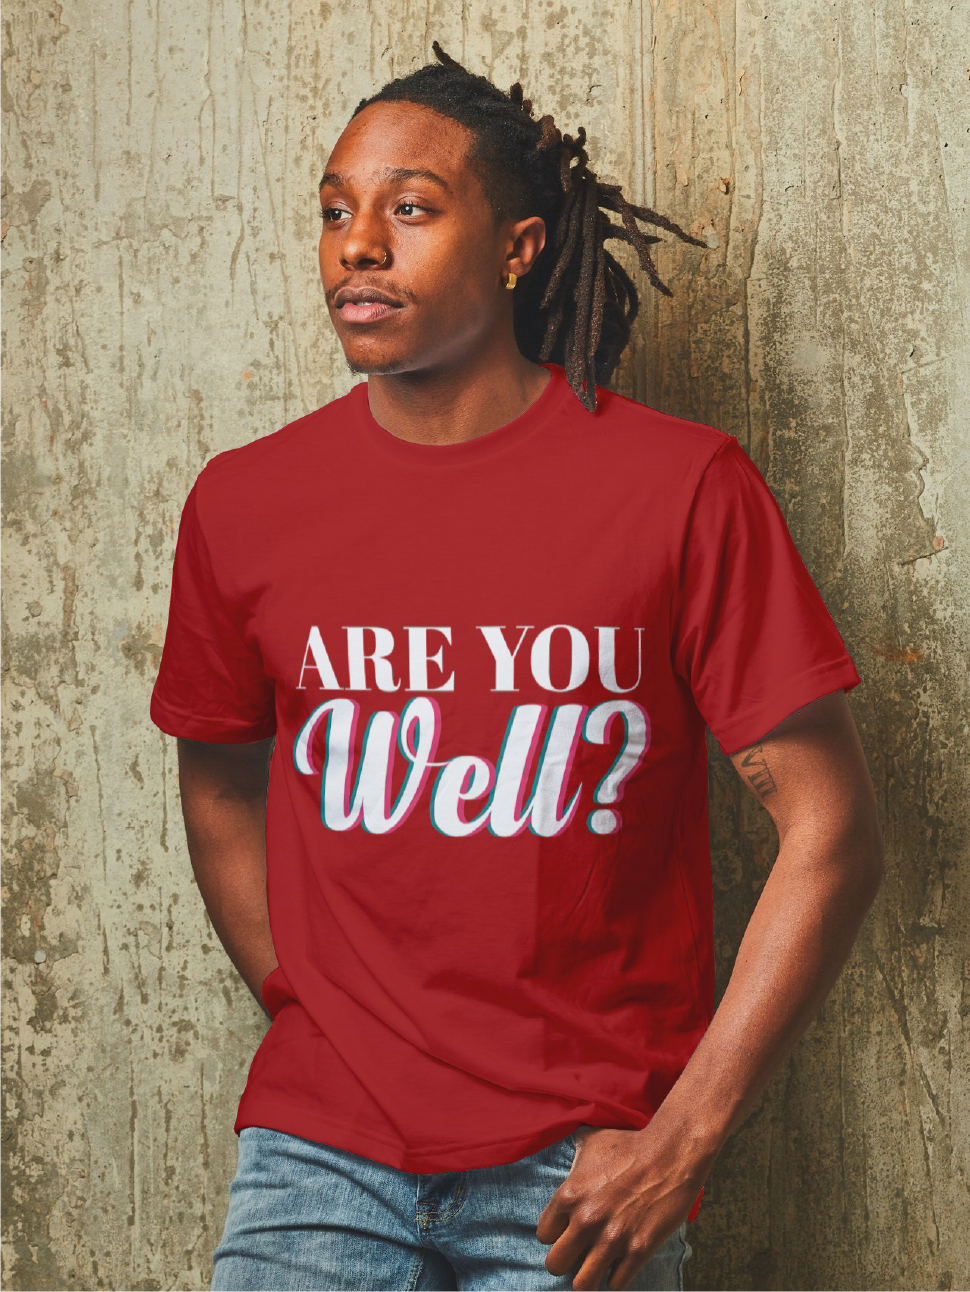 "ARE YOU WELL" Short-Sleeve Unisex men's T-Shirt - The Fearless Shop